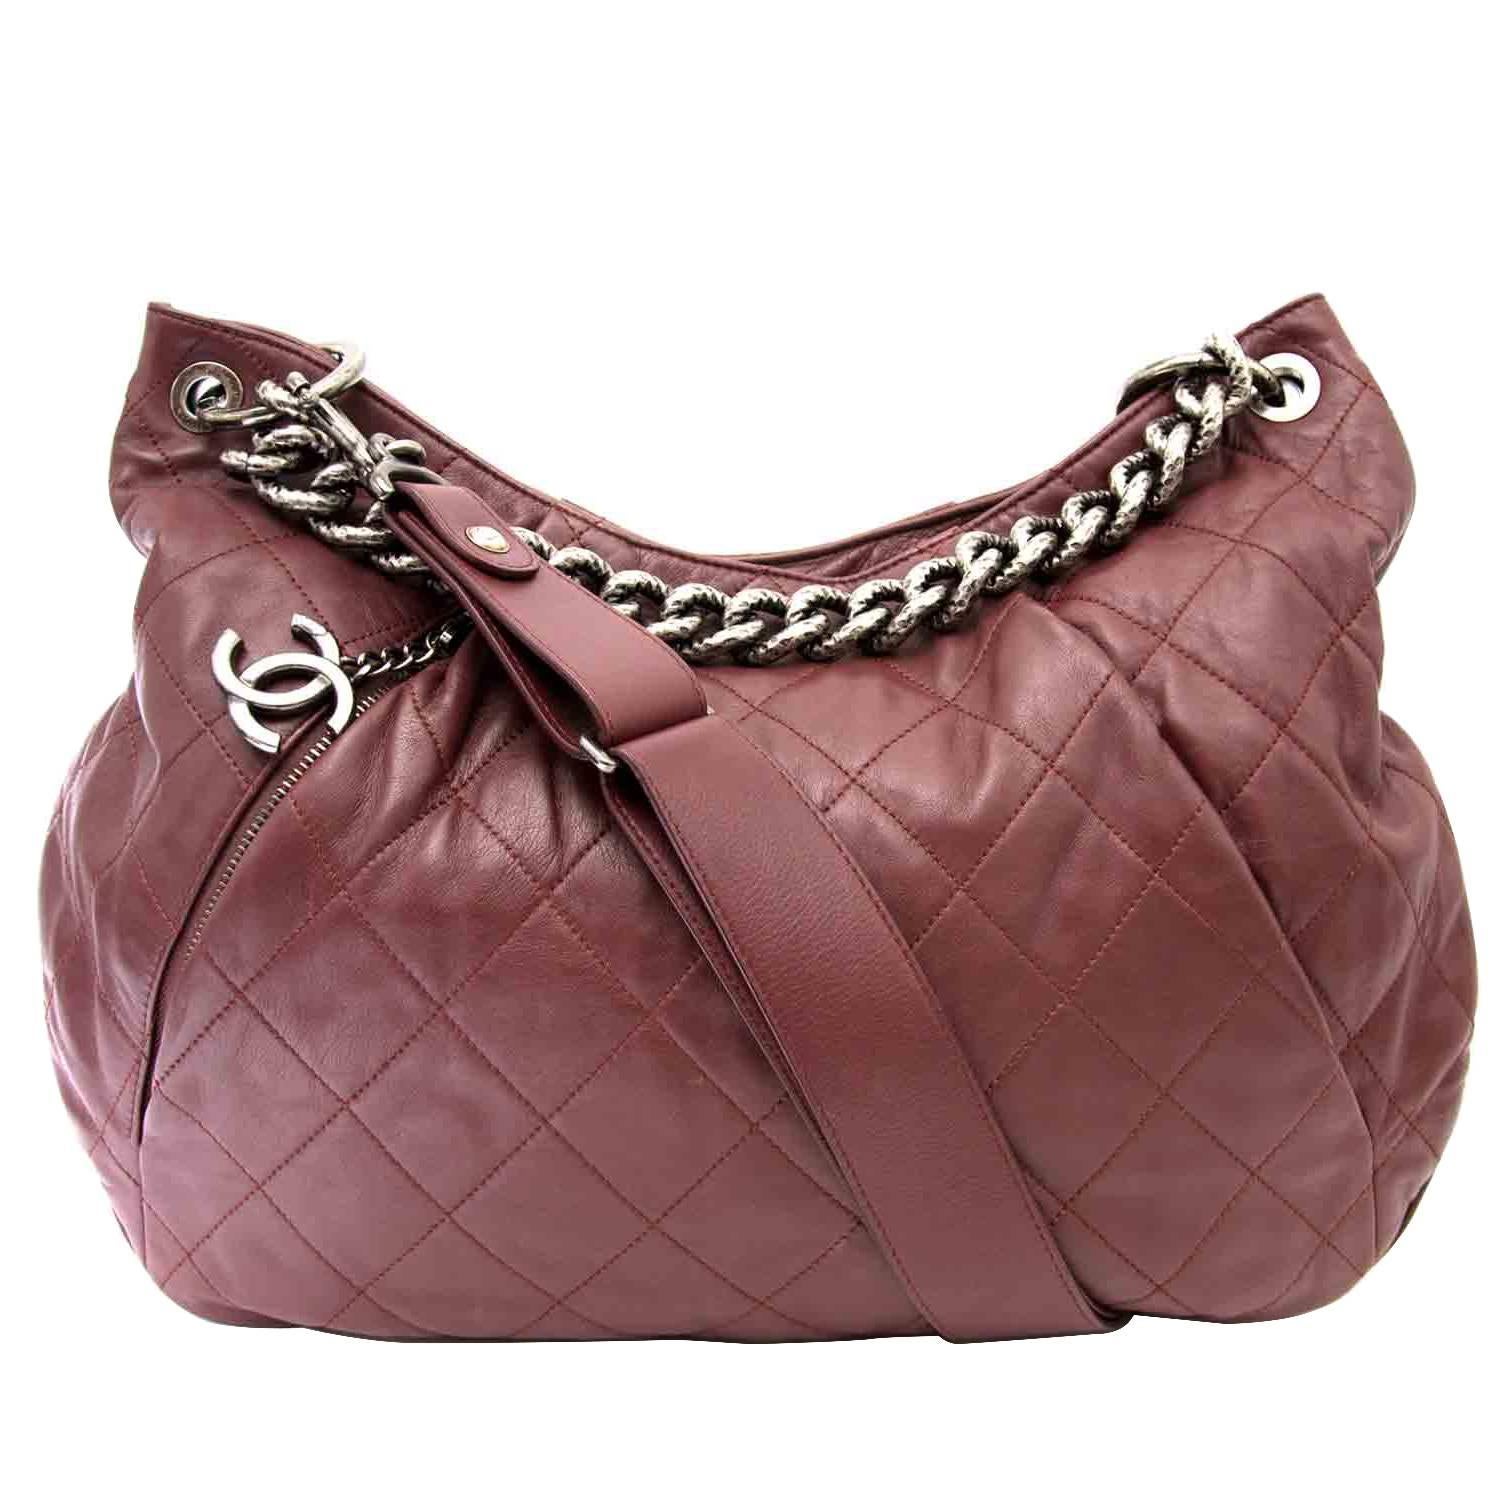 Sell Chanel Small Gabrielle Bag - Pink/Red